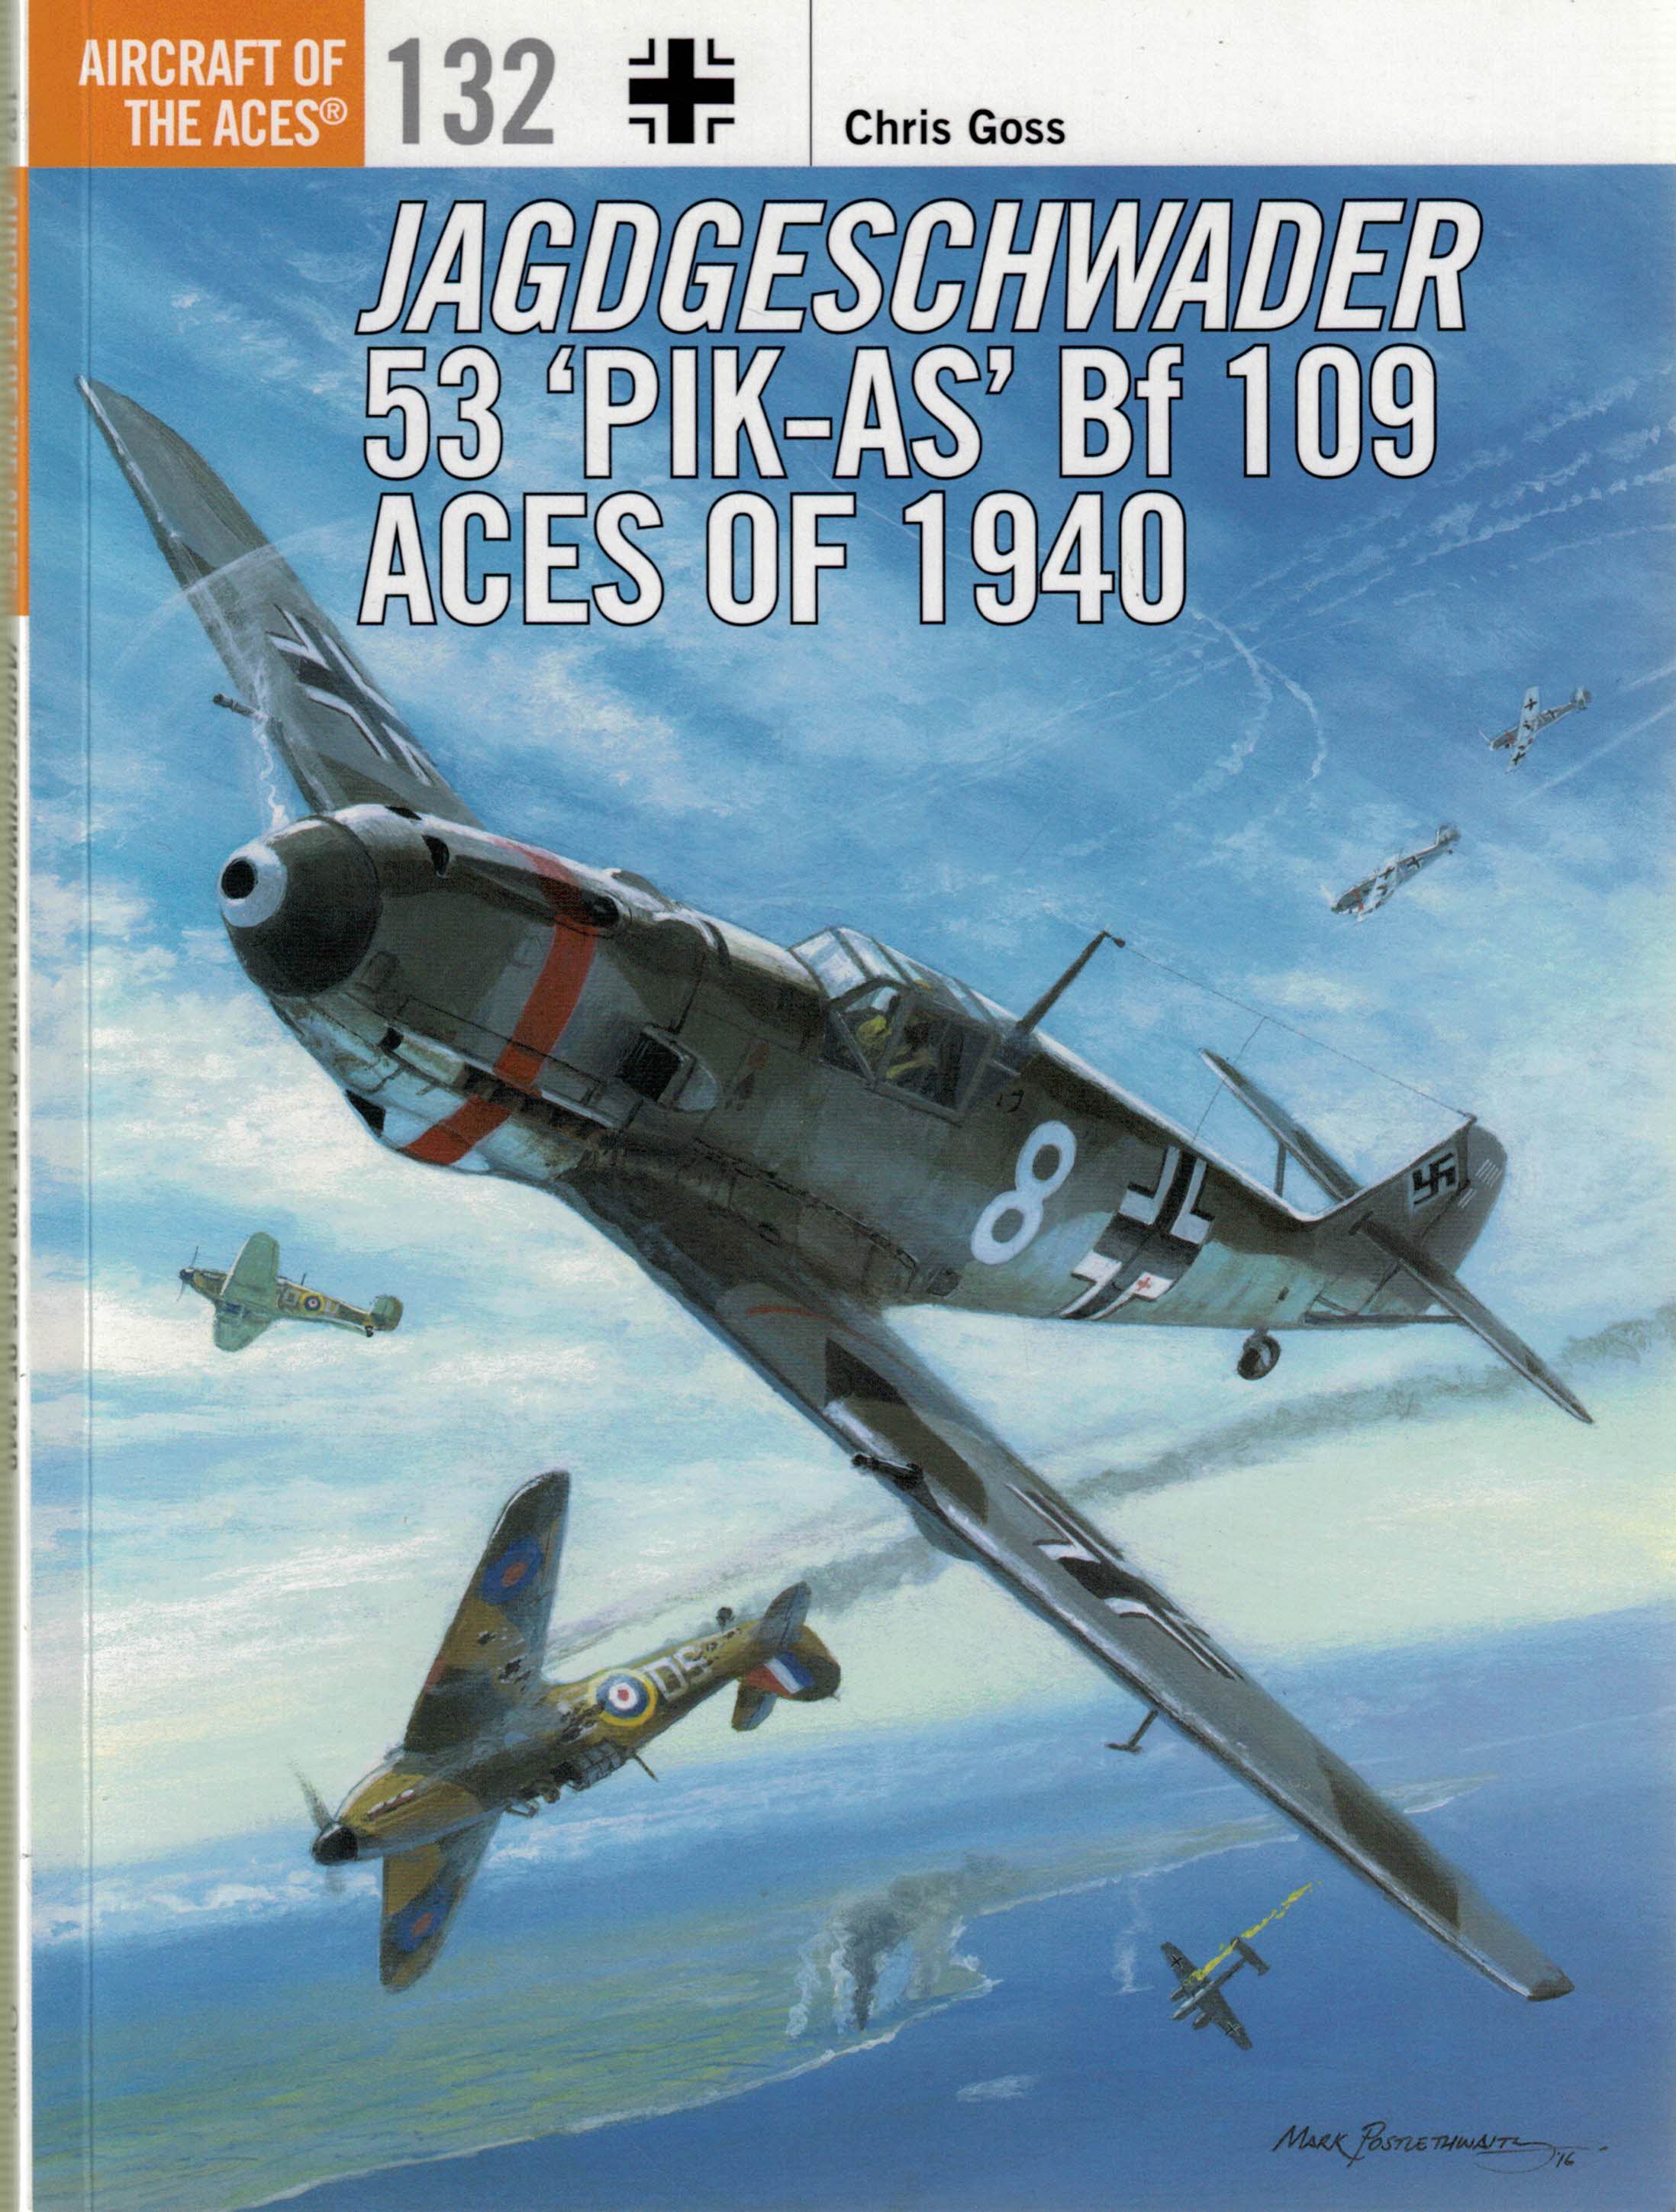 Jagdgeschwader 53 'Pik-As' Bf 109 Aces of 1940. Osprey Aircraft of the Aces. Series No. 132.